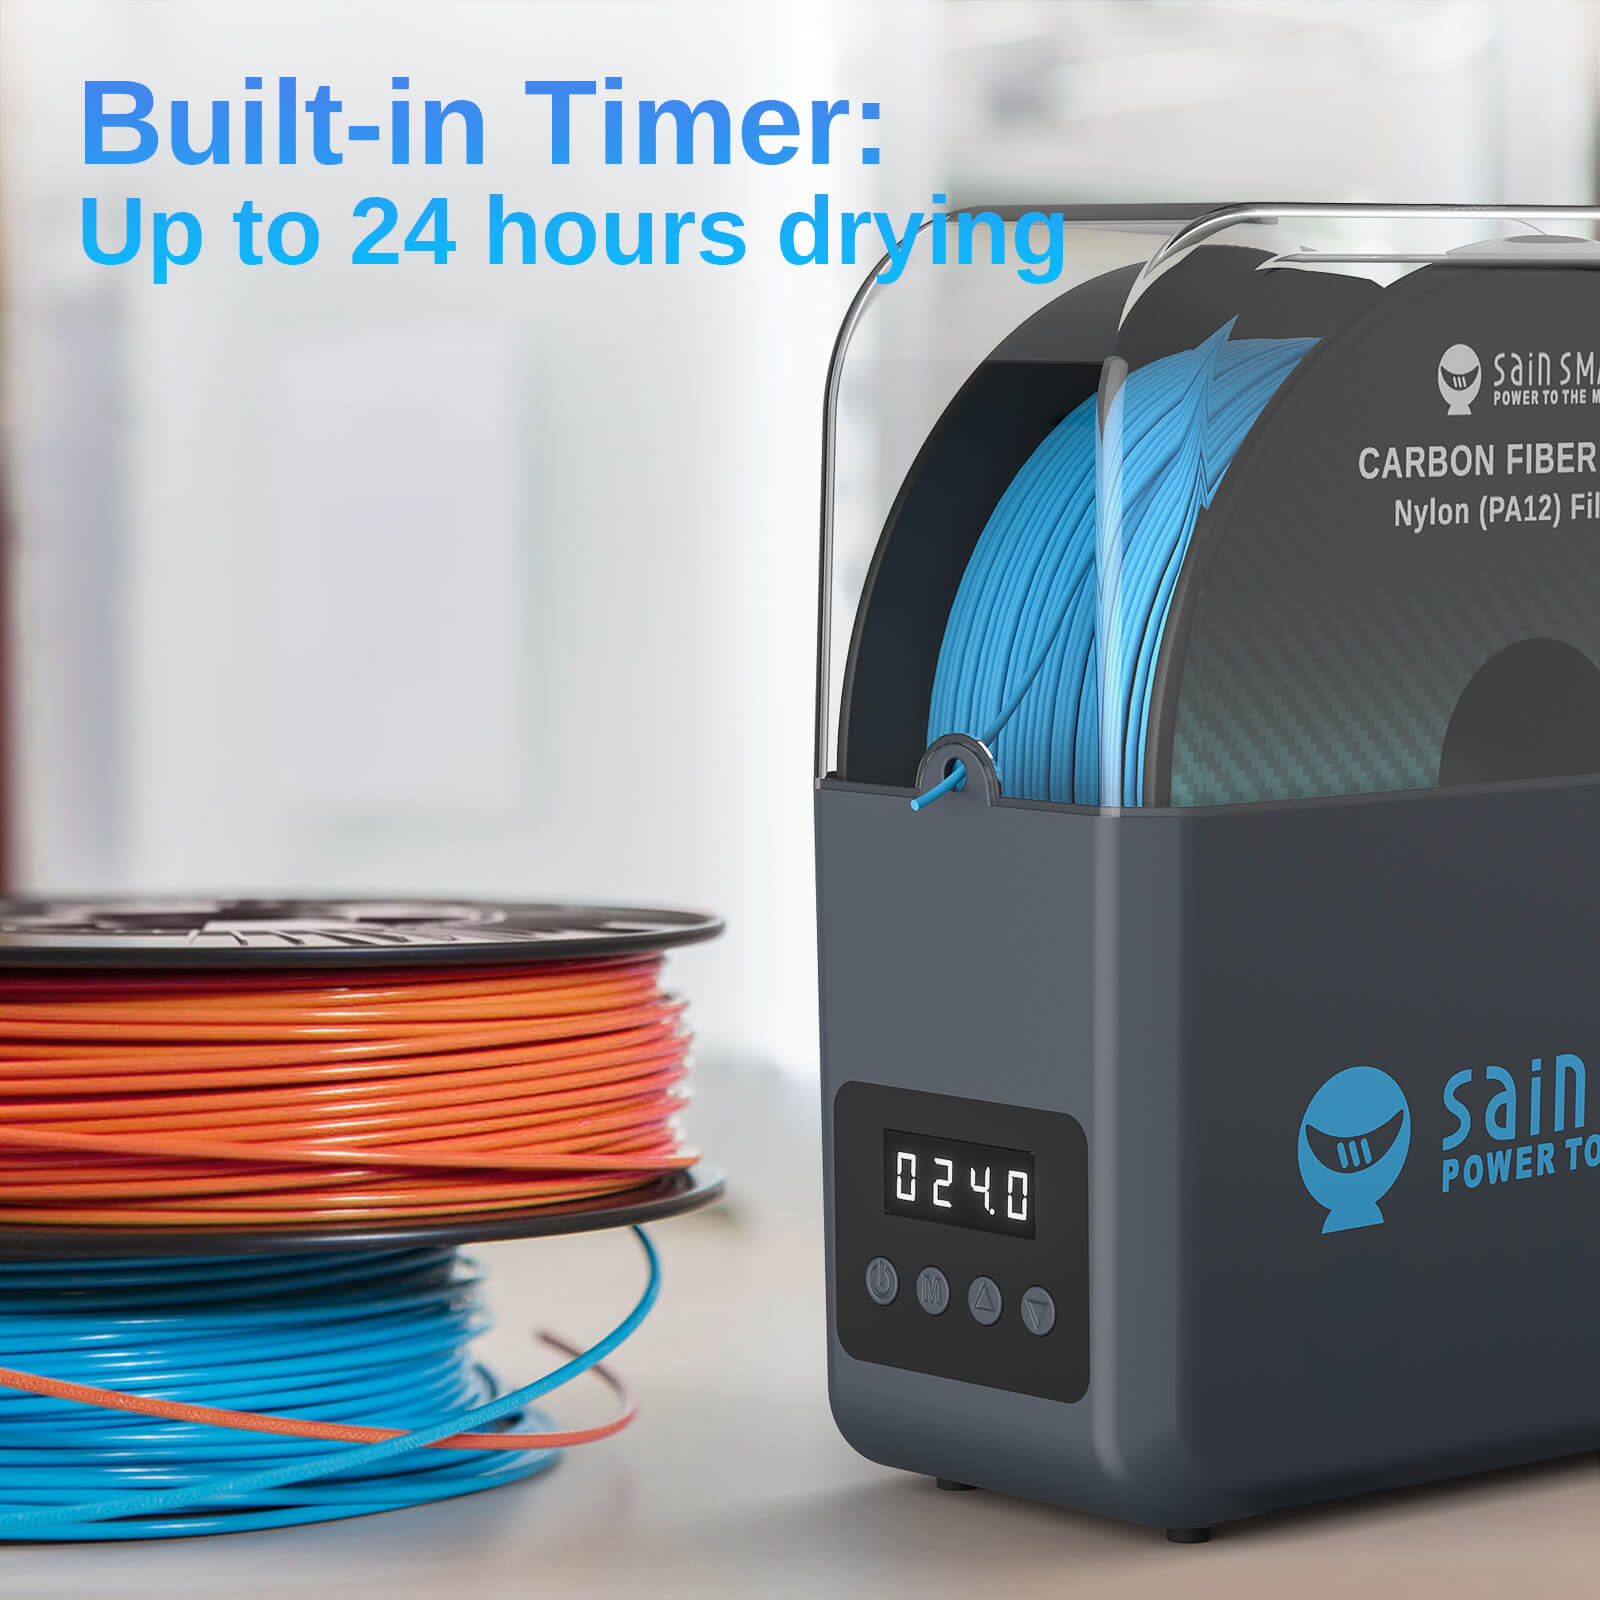 Filament Storage Dry Box, Dehydrator Container for 3D Printing | SainSmart